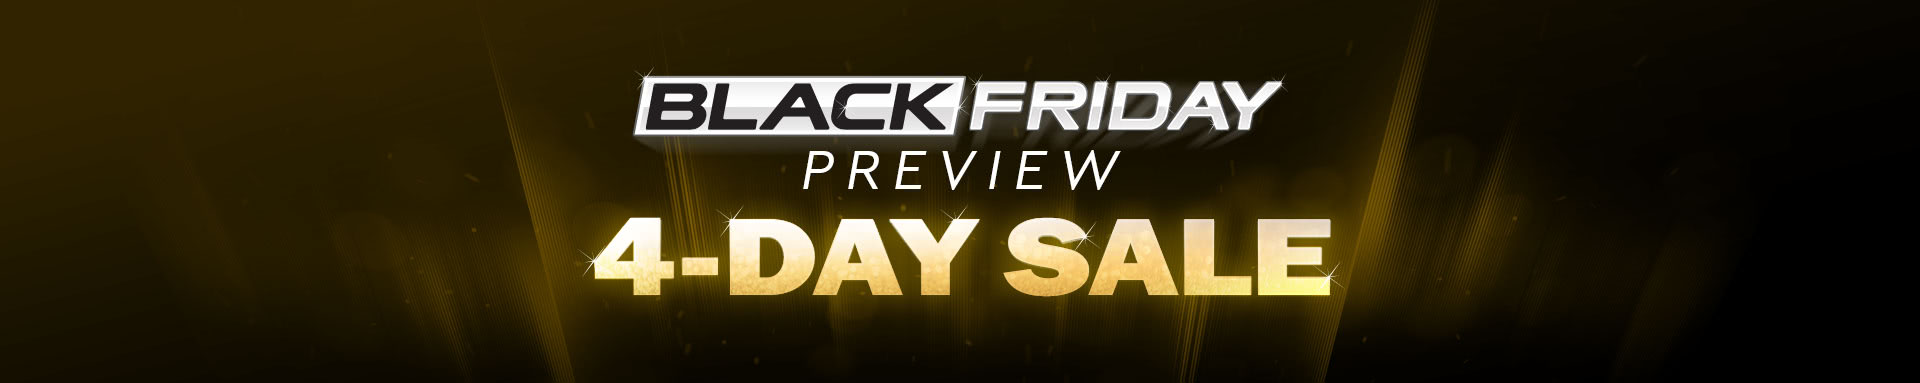 Black Friday Preview: 4-Day Sale